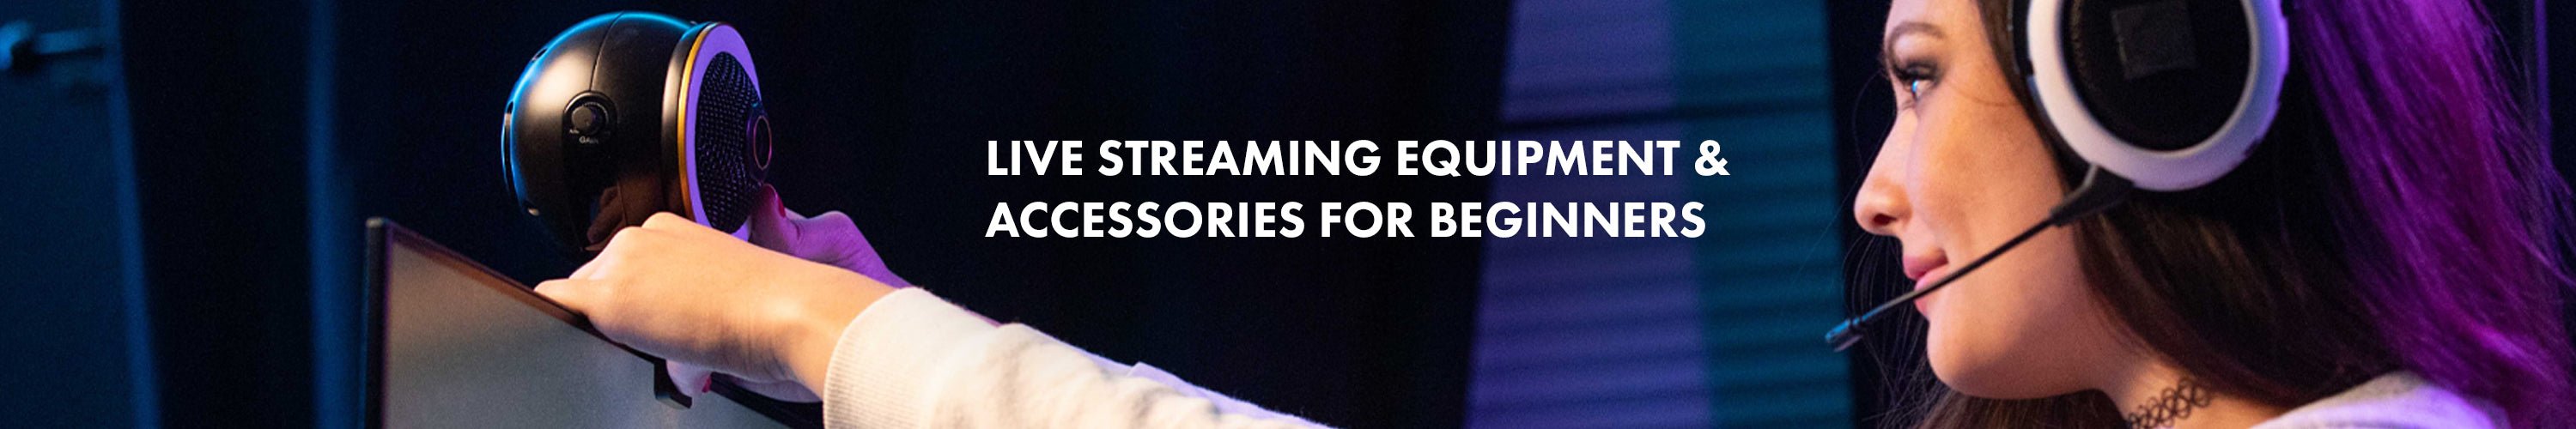 Live Streaming Equipment & Accessories for Beginners - Movo